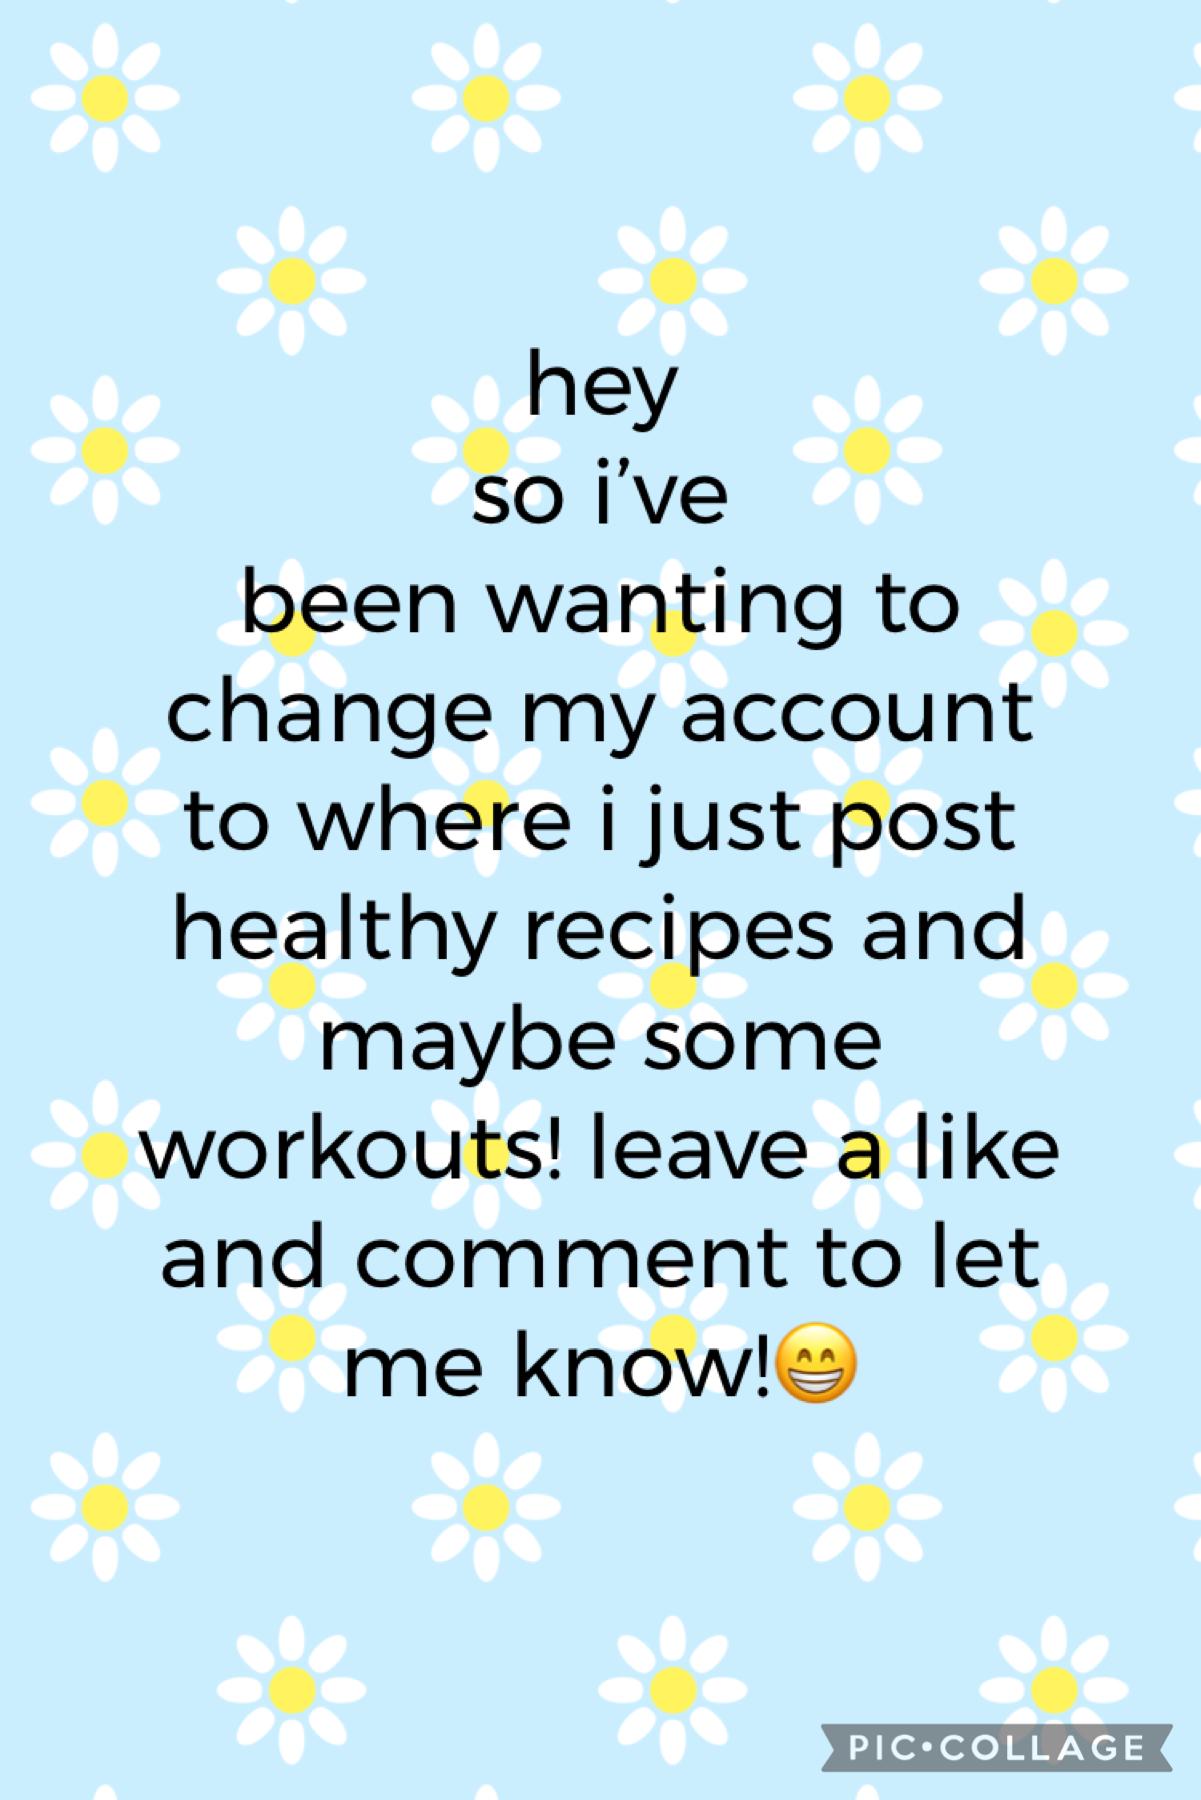 plz let me know. i don’t want to change my account unless u guys r ok with it. also how do i change my account name?
thx! and love y’all 